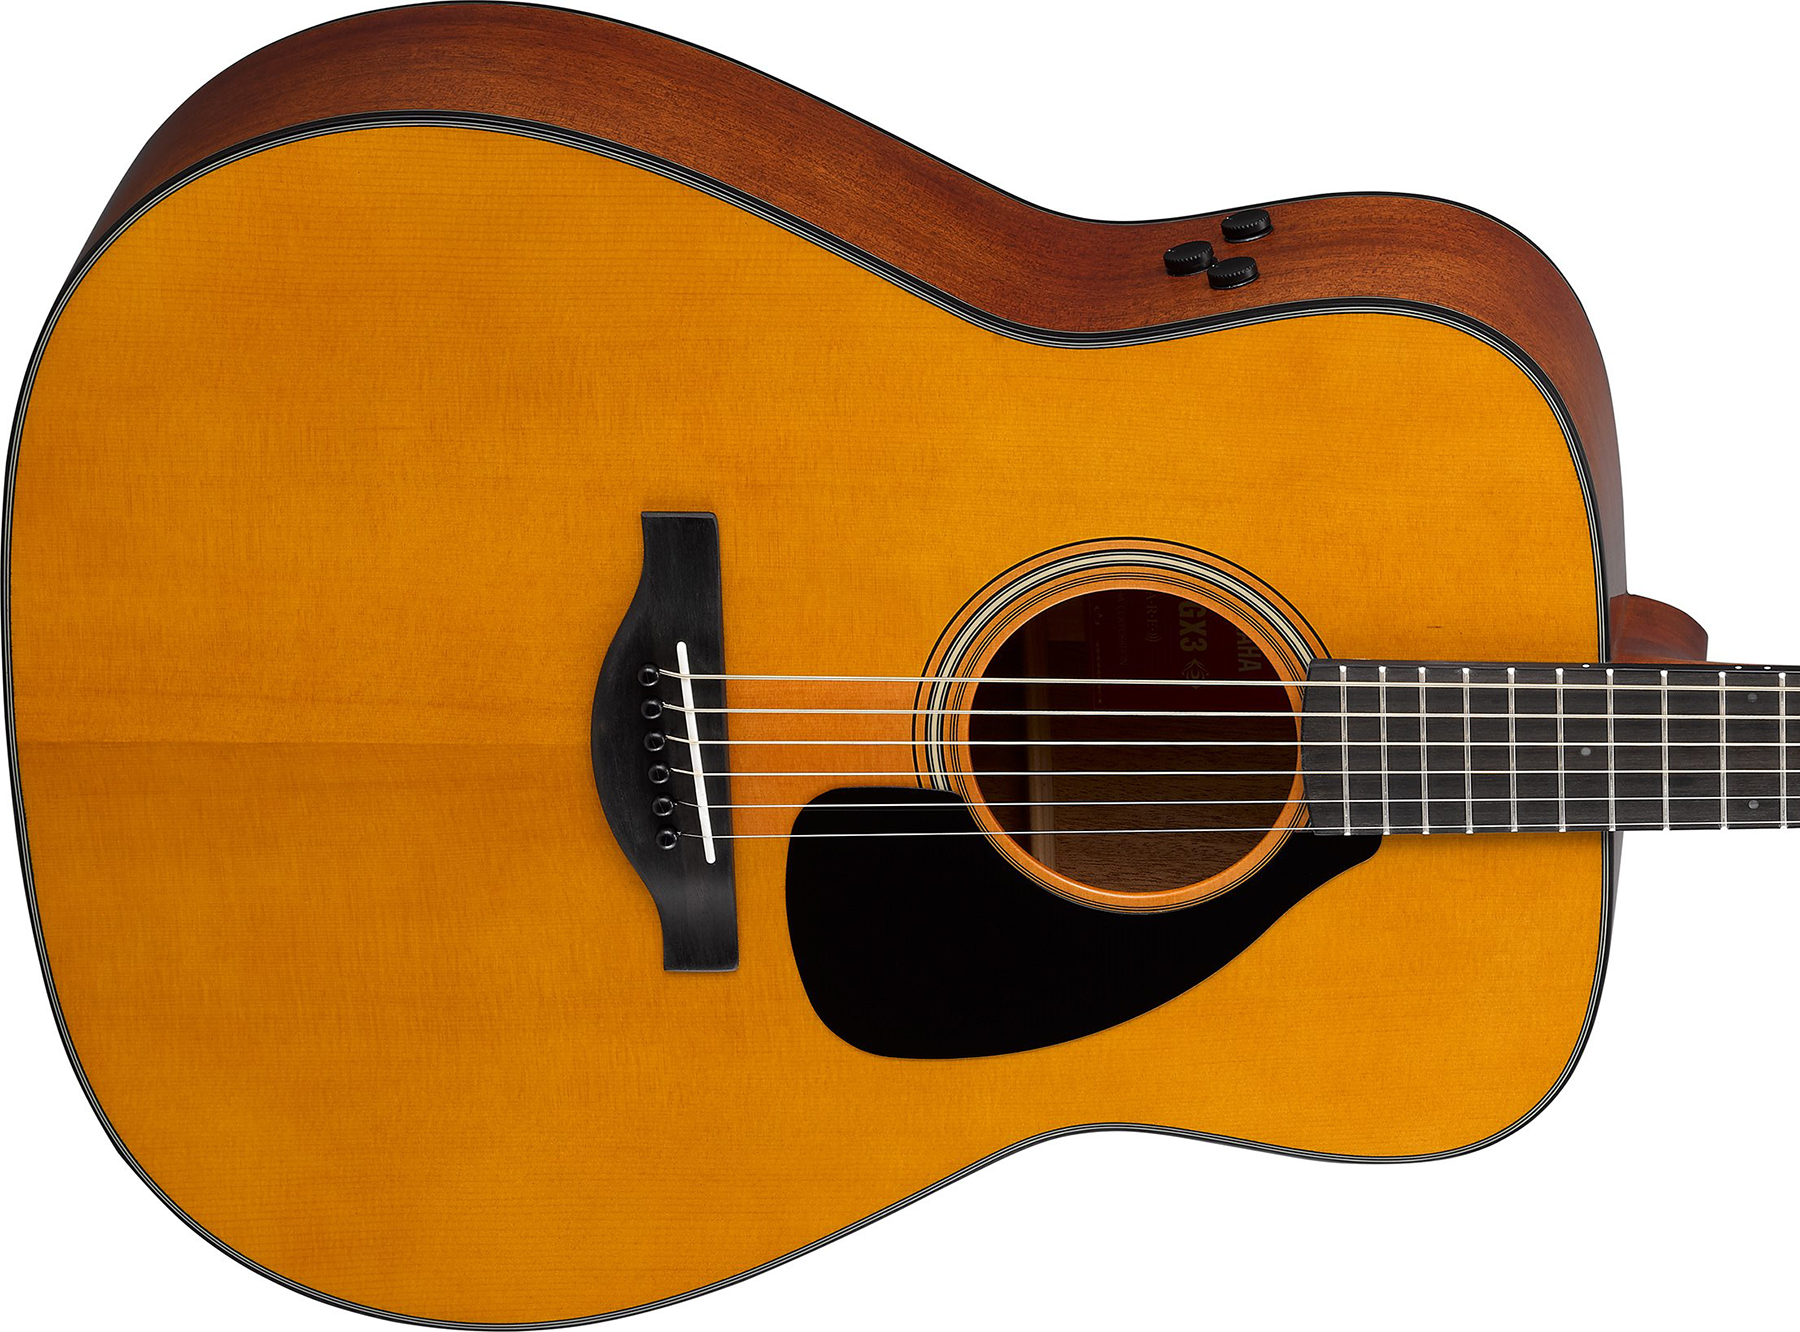 Yamaha Fgx3 Red Label Dreadnought Epicea Palissandre Eb - Heritage Natural - Acoustic guitar & electro - Variation 2